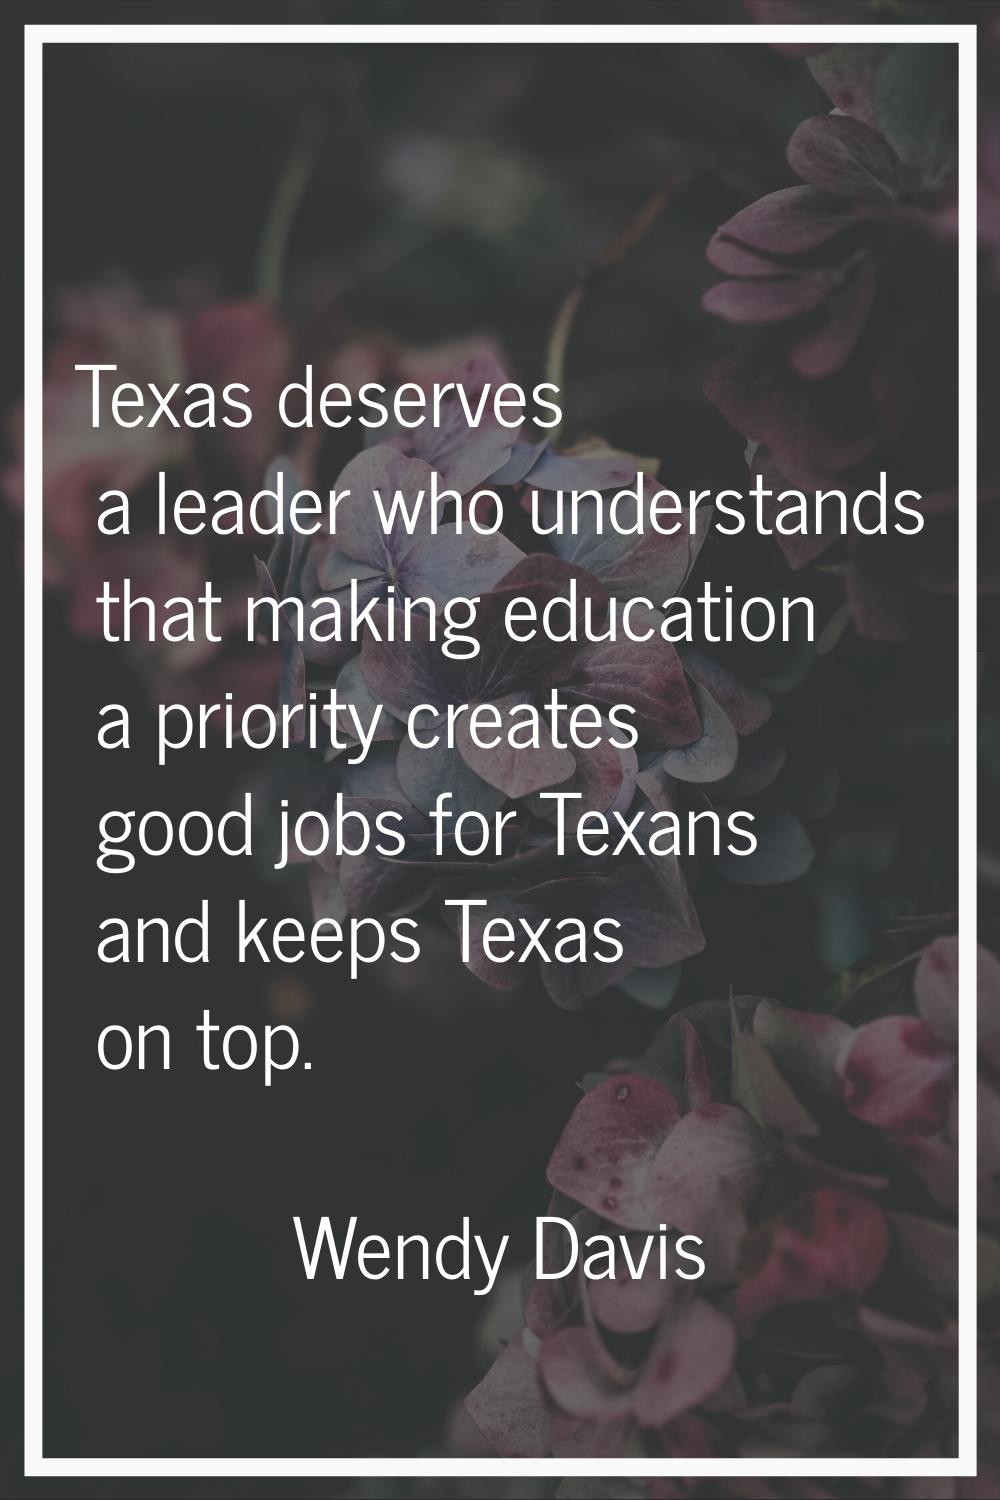 Texas deserves a leader who understands that making education a priority creates good jobs for Texa